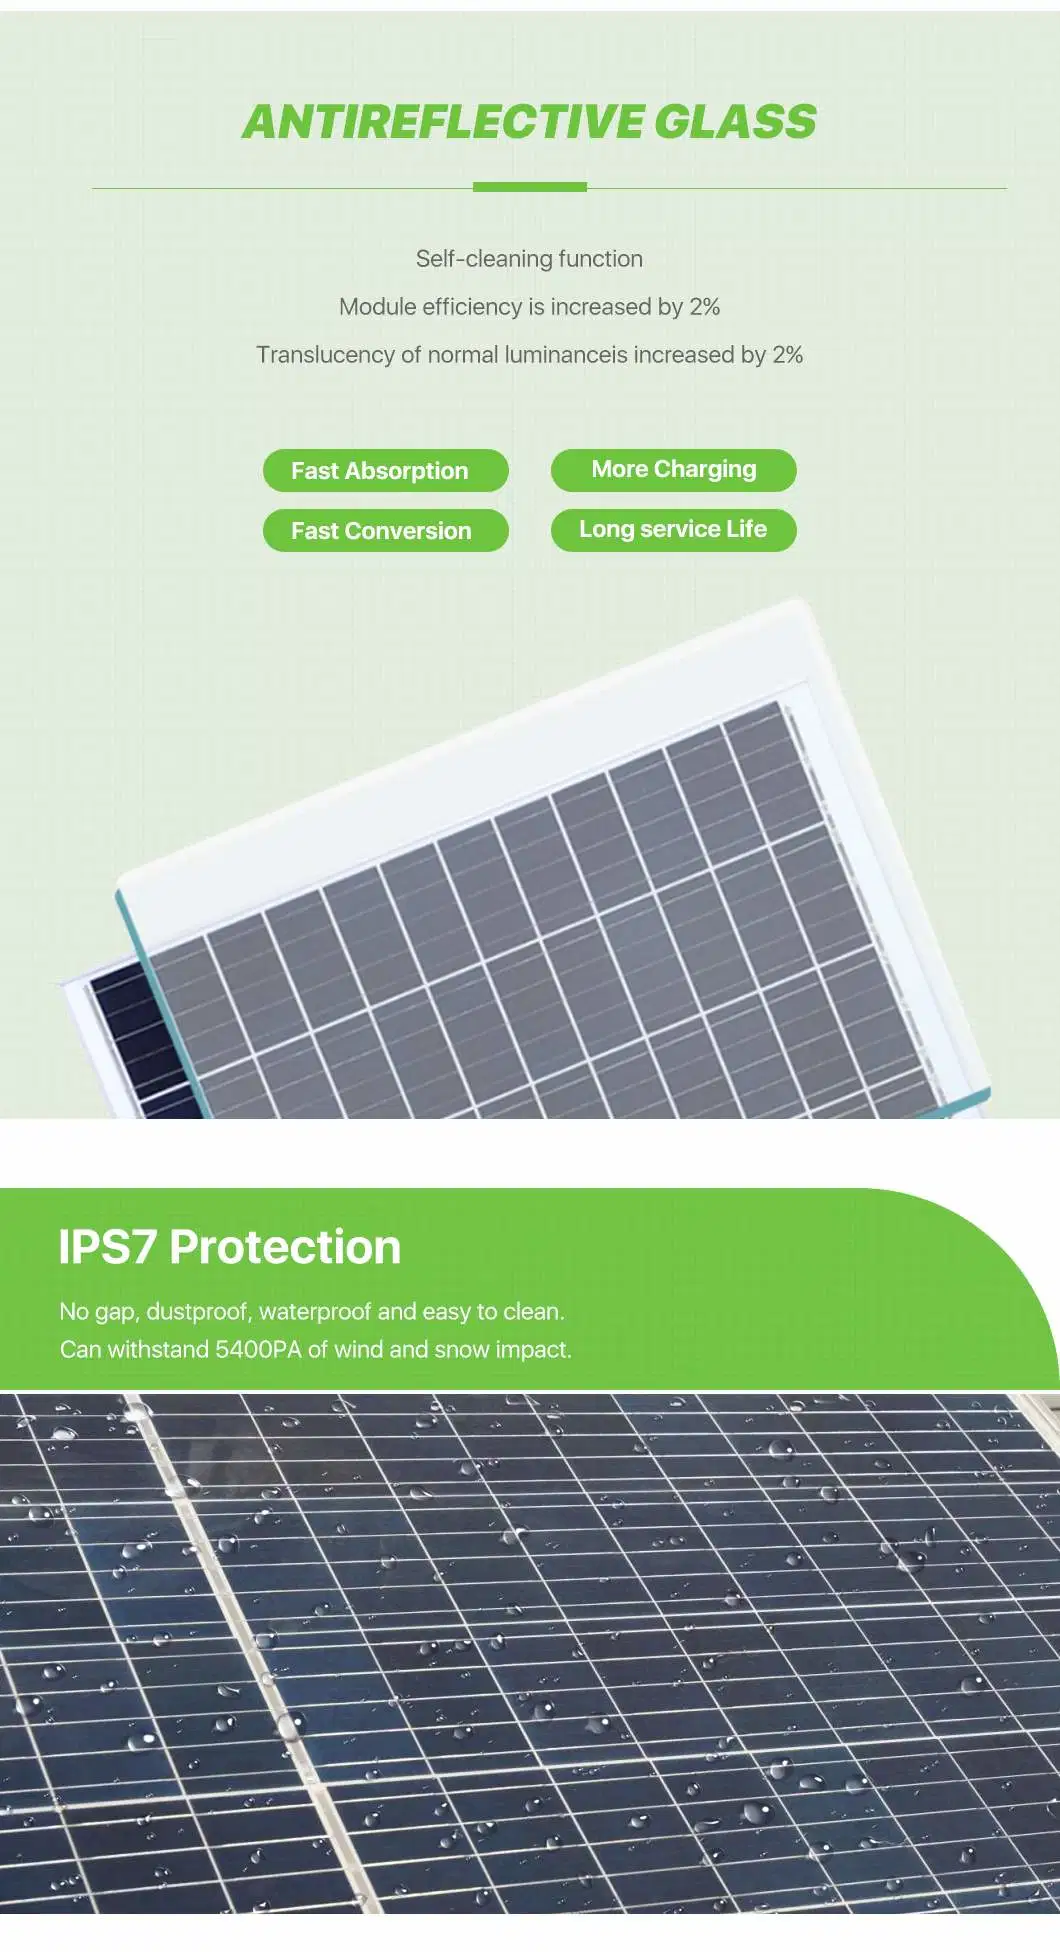 Photovoltaic Solar Energy Power Generation Project Module Installation, Integrated Process Solar Panels with Support